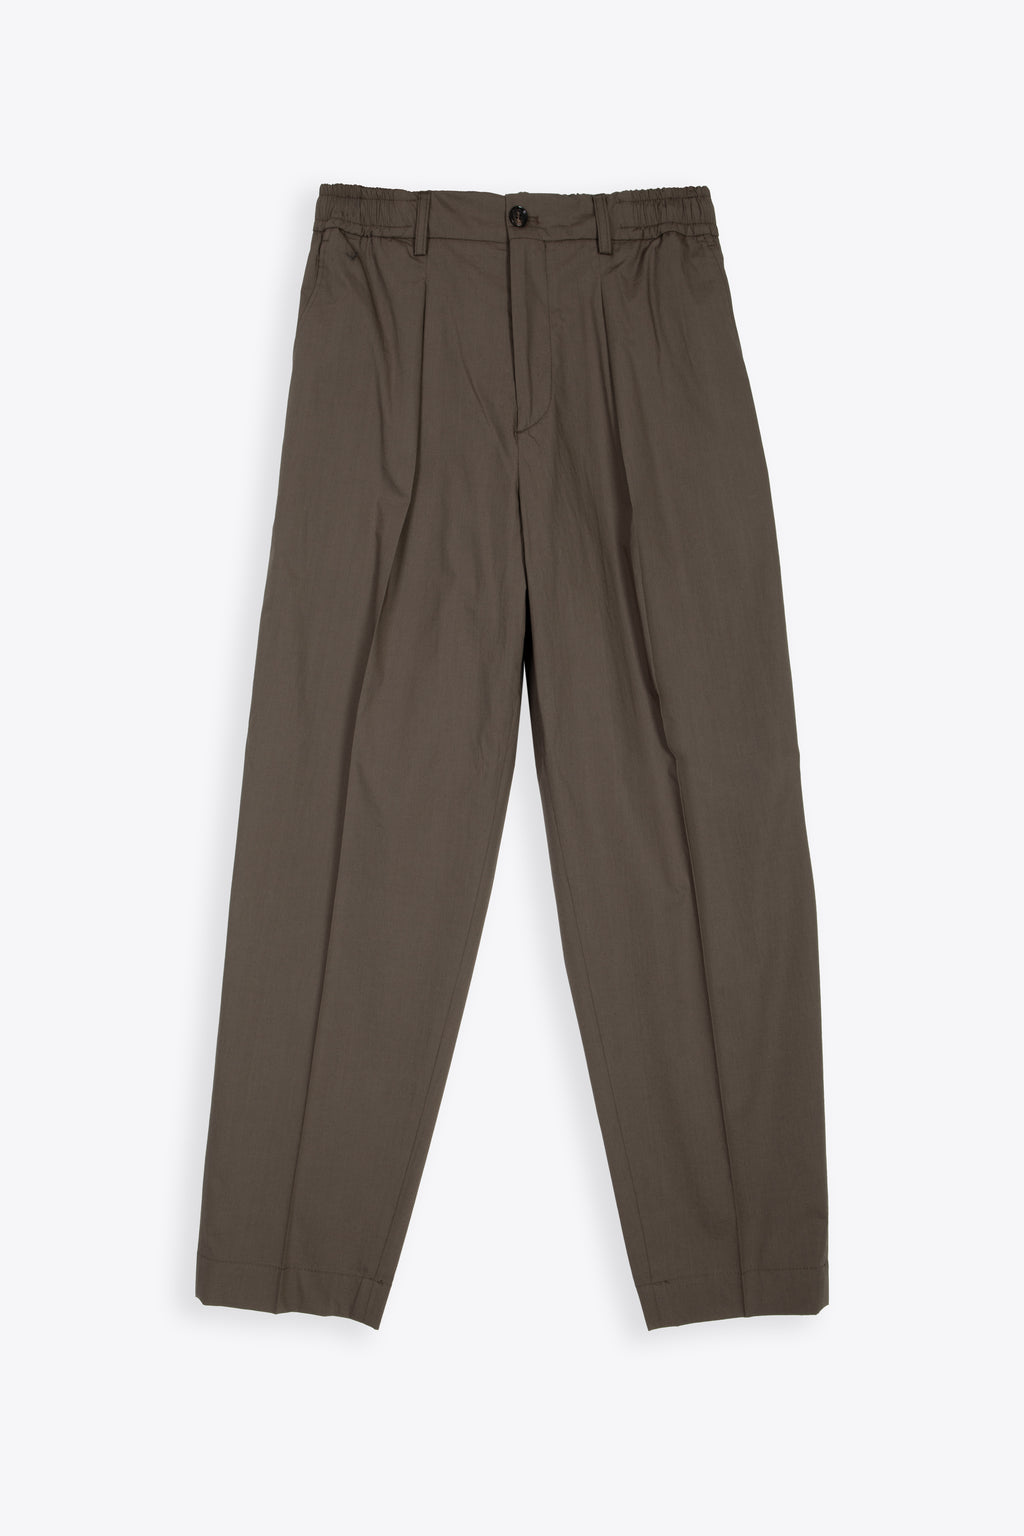 alt-image__Brown-cotton-cropped-pant-with-elastic-waistband